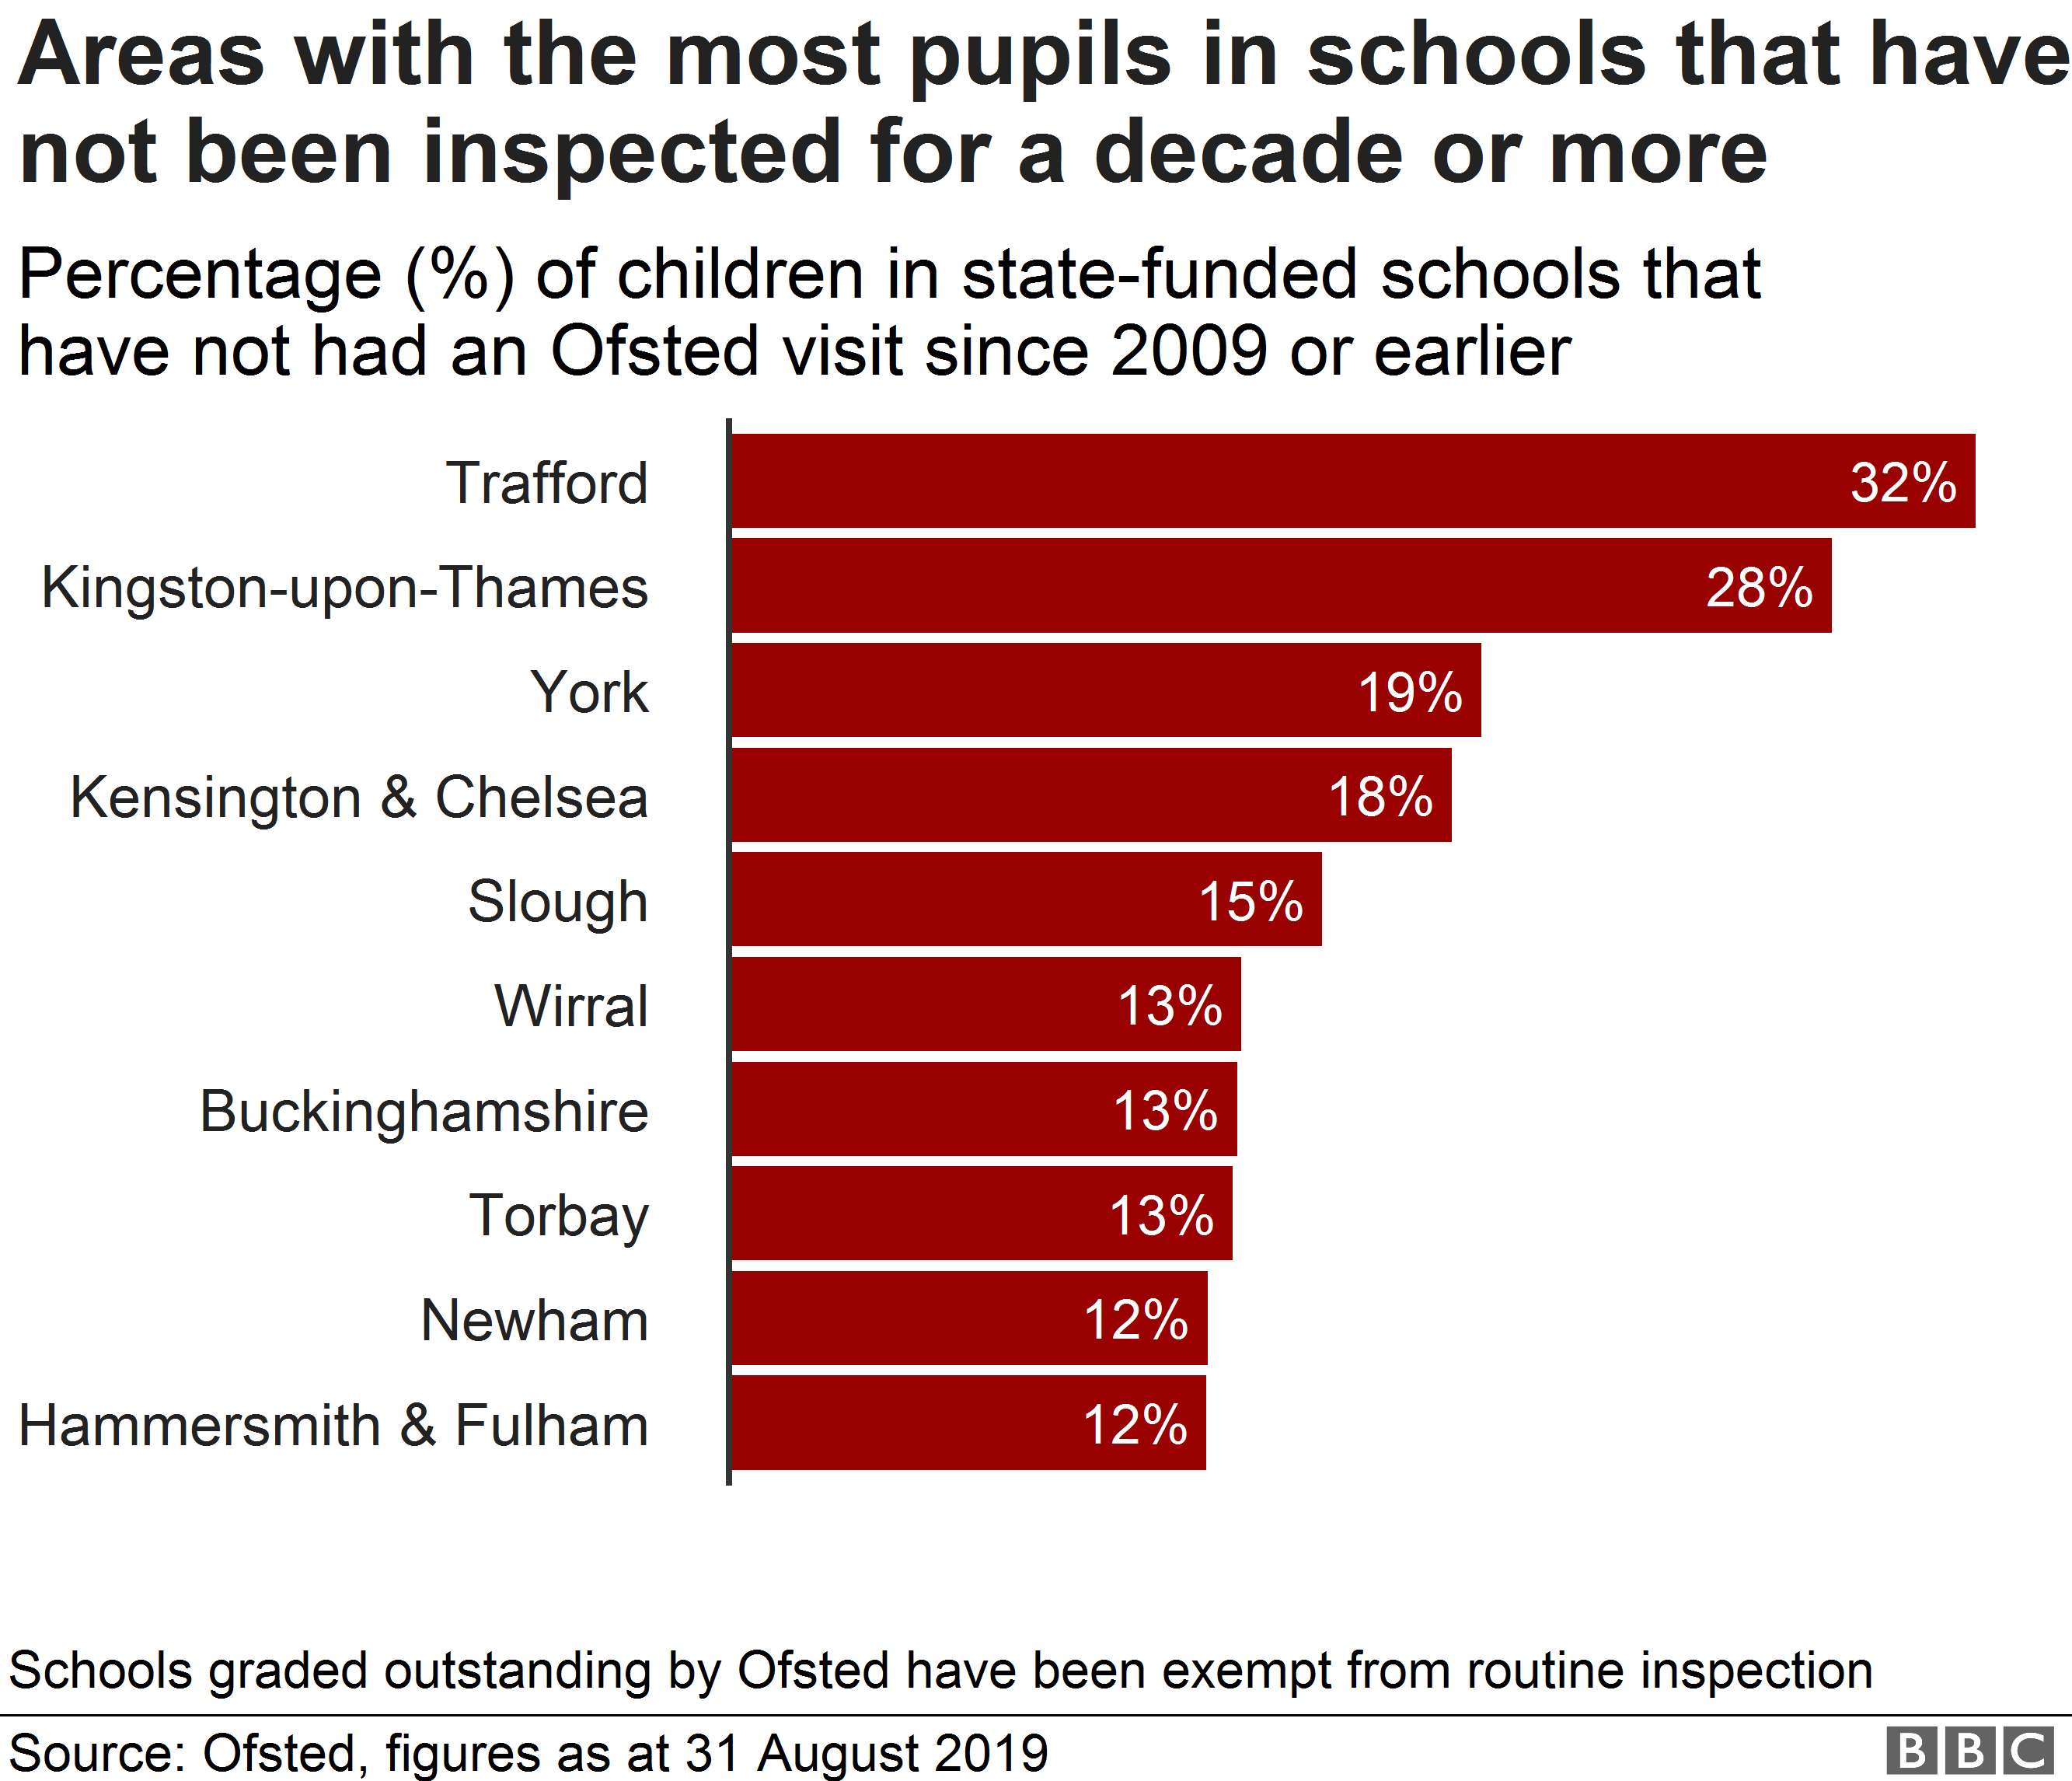 Chart showing areas with the most pupils in schools that have not had an Ofsted inspection in over a decade